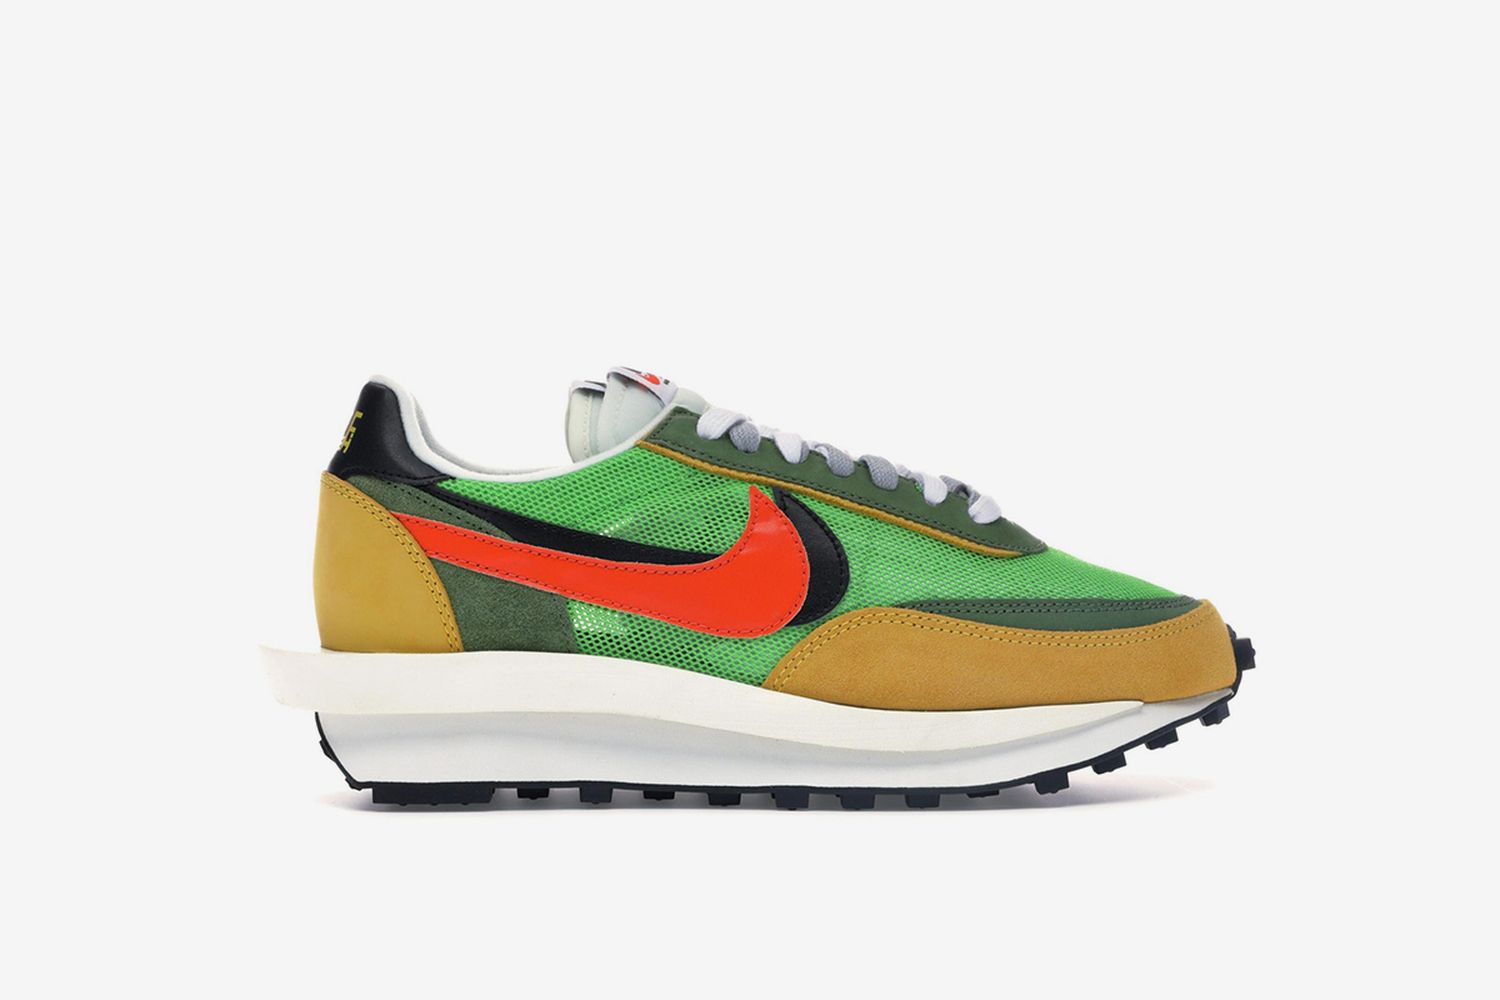 sacai x Nike Sneakers Now Available at StockX | Highsnobiety